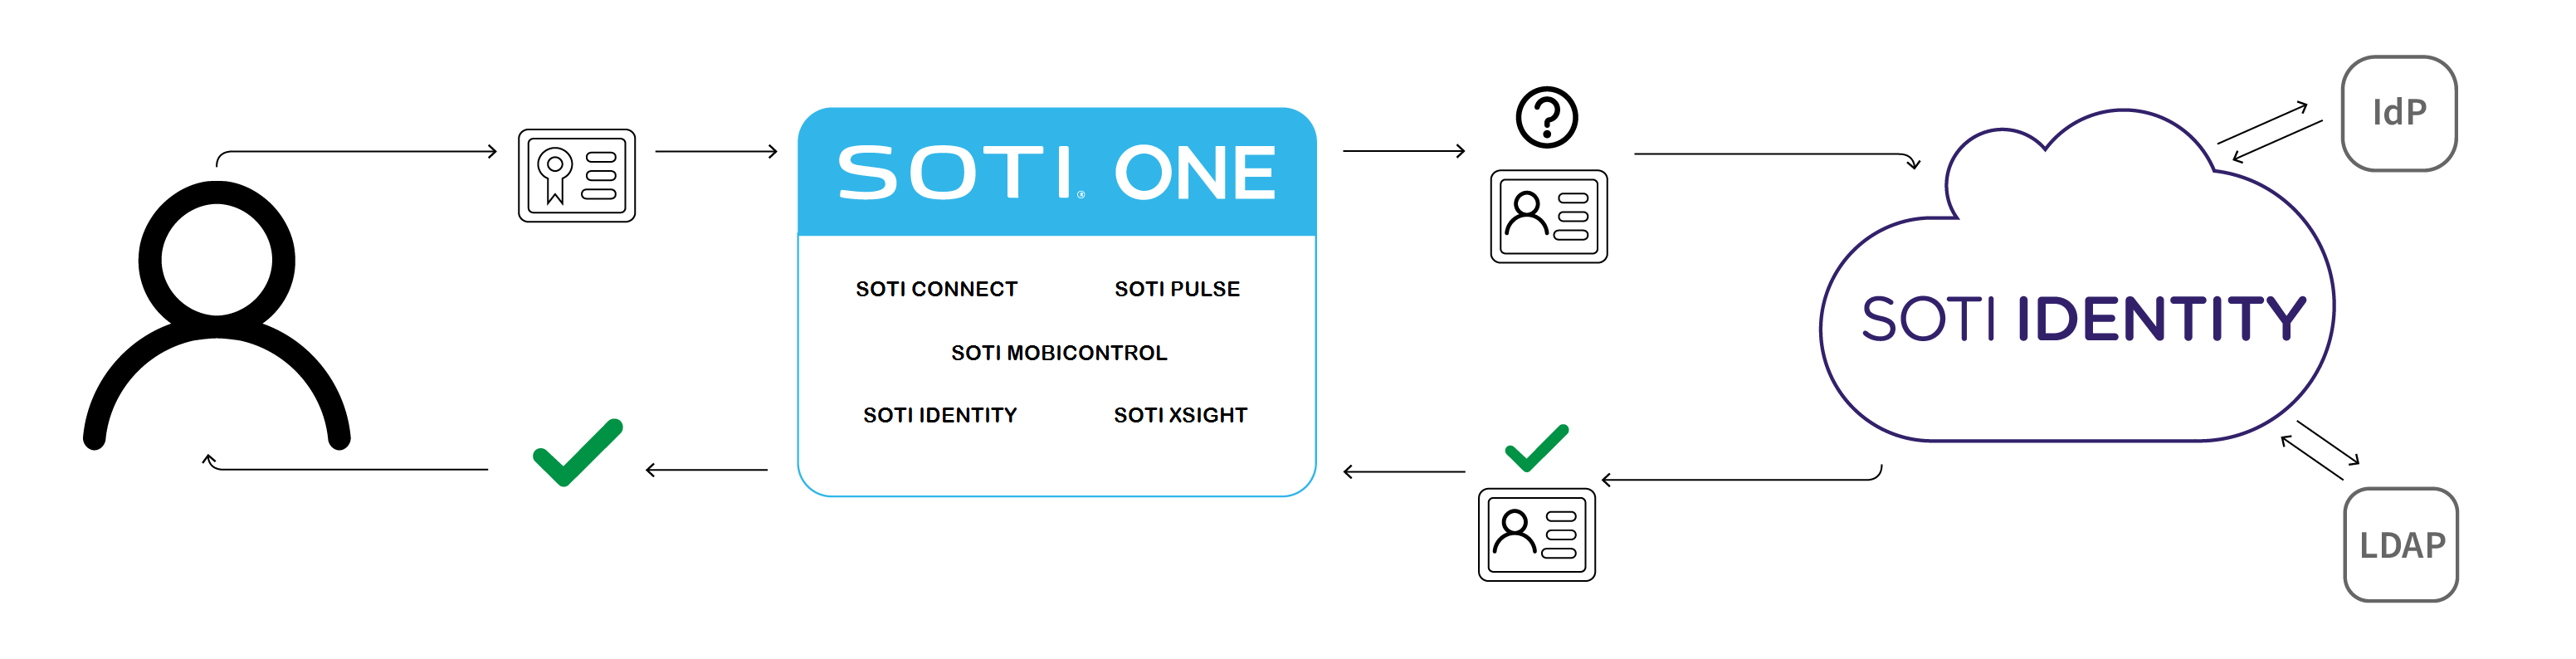 How SOTI Identity handles LDAP and IdP connections